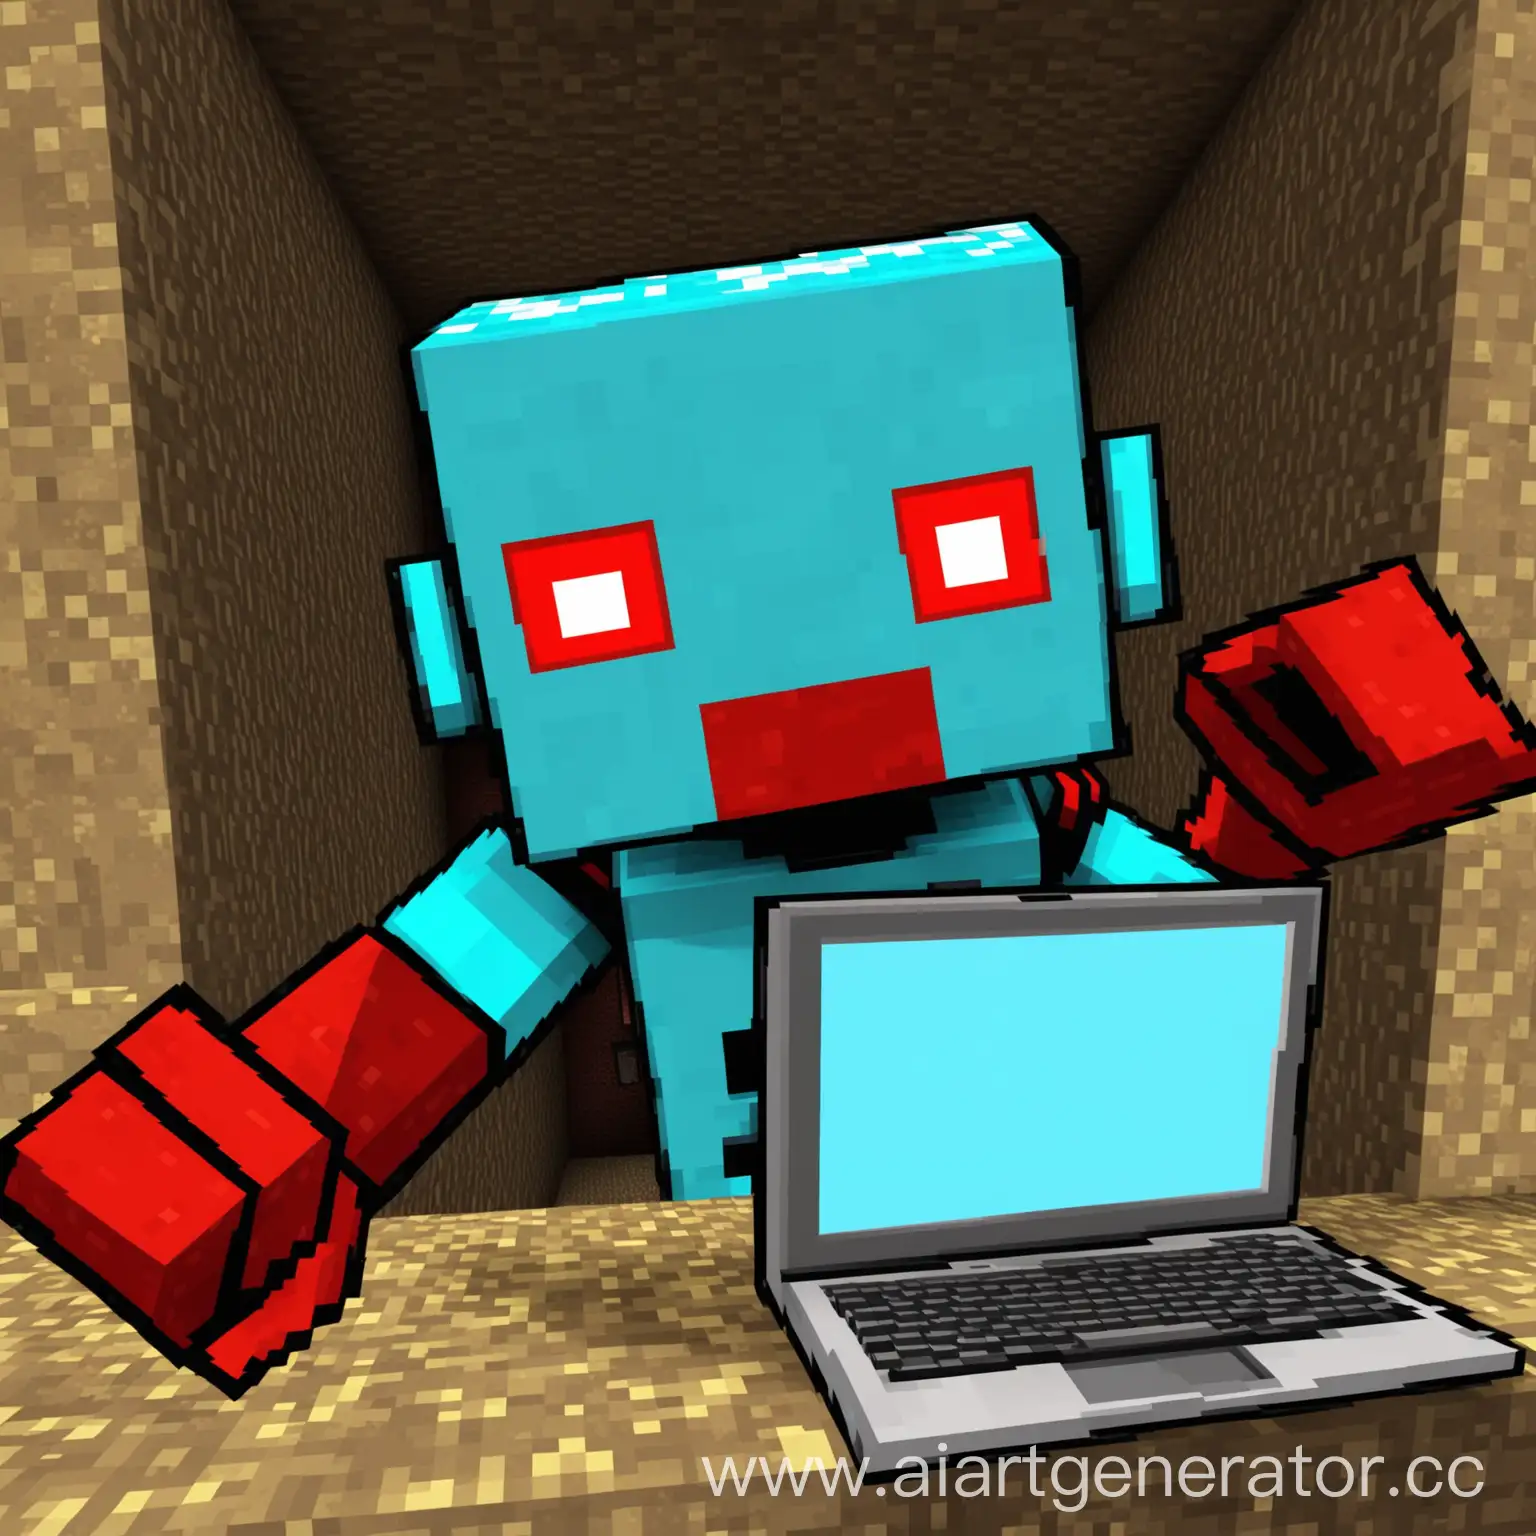 Colorful-Robot-Head-with-Red-and-Blue-Eyes-in-Minecraft-Style